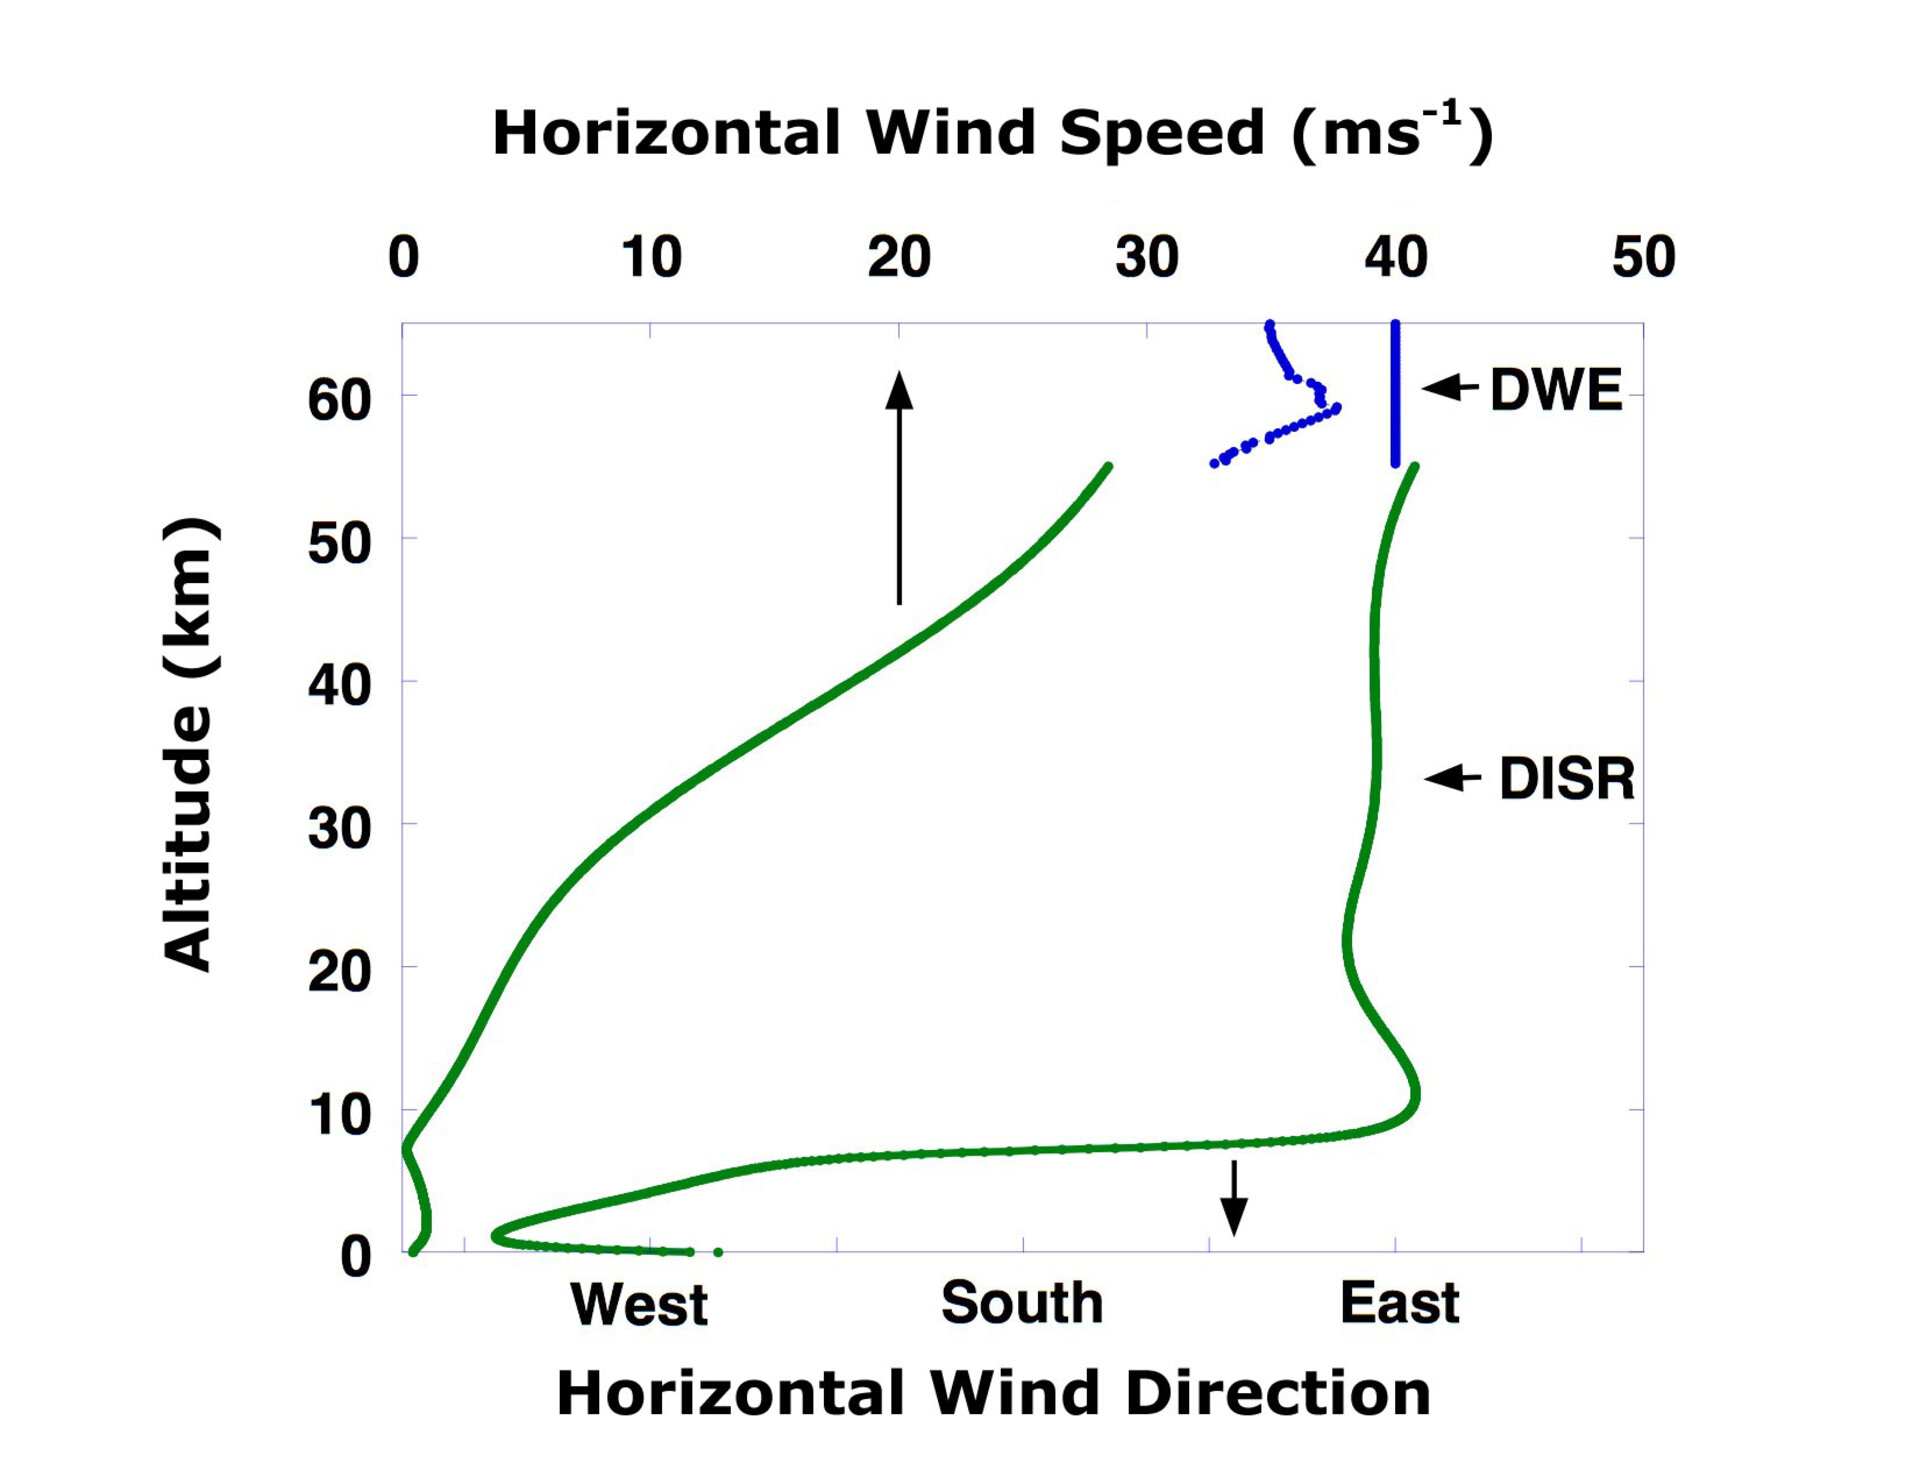 Wind speed and direction from DWE and DISR